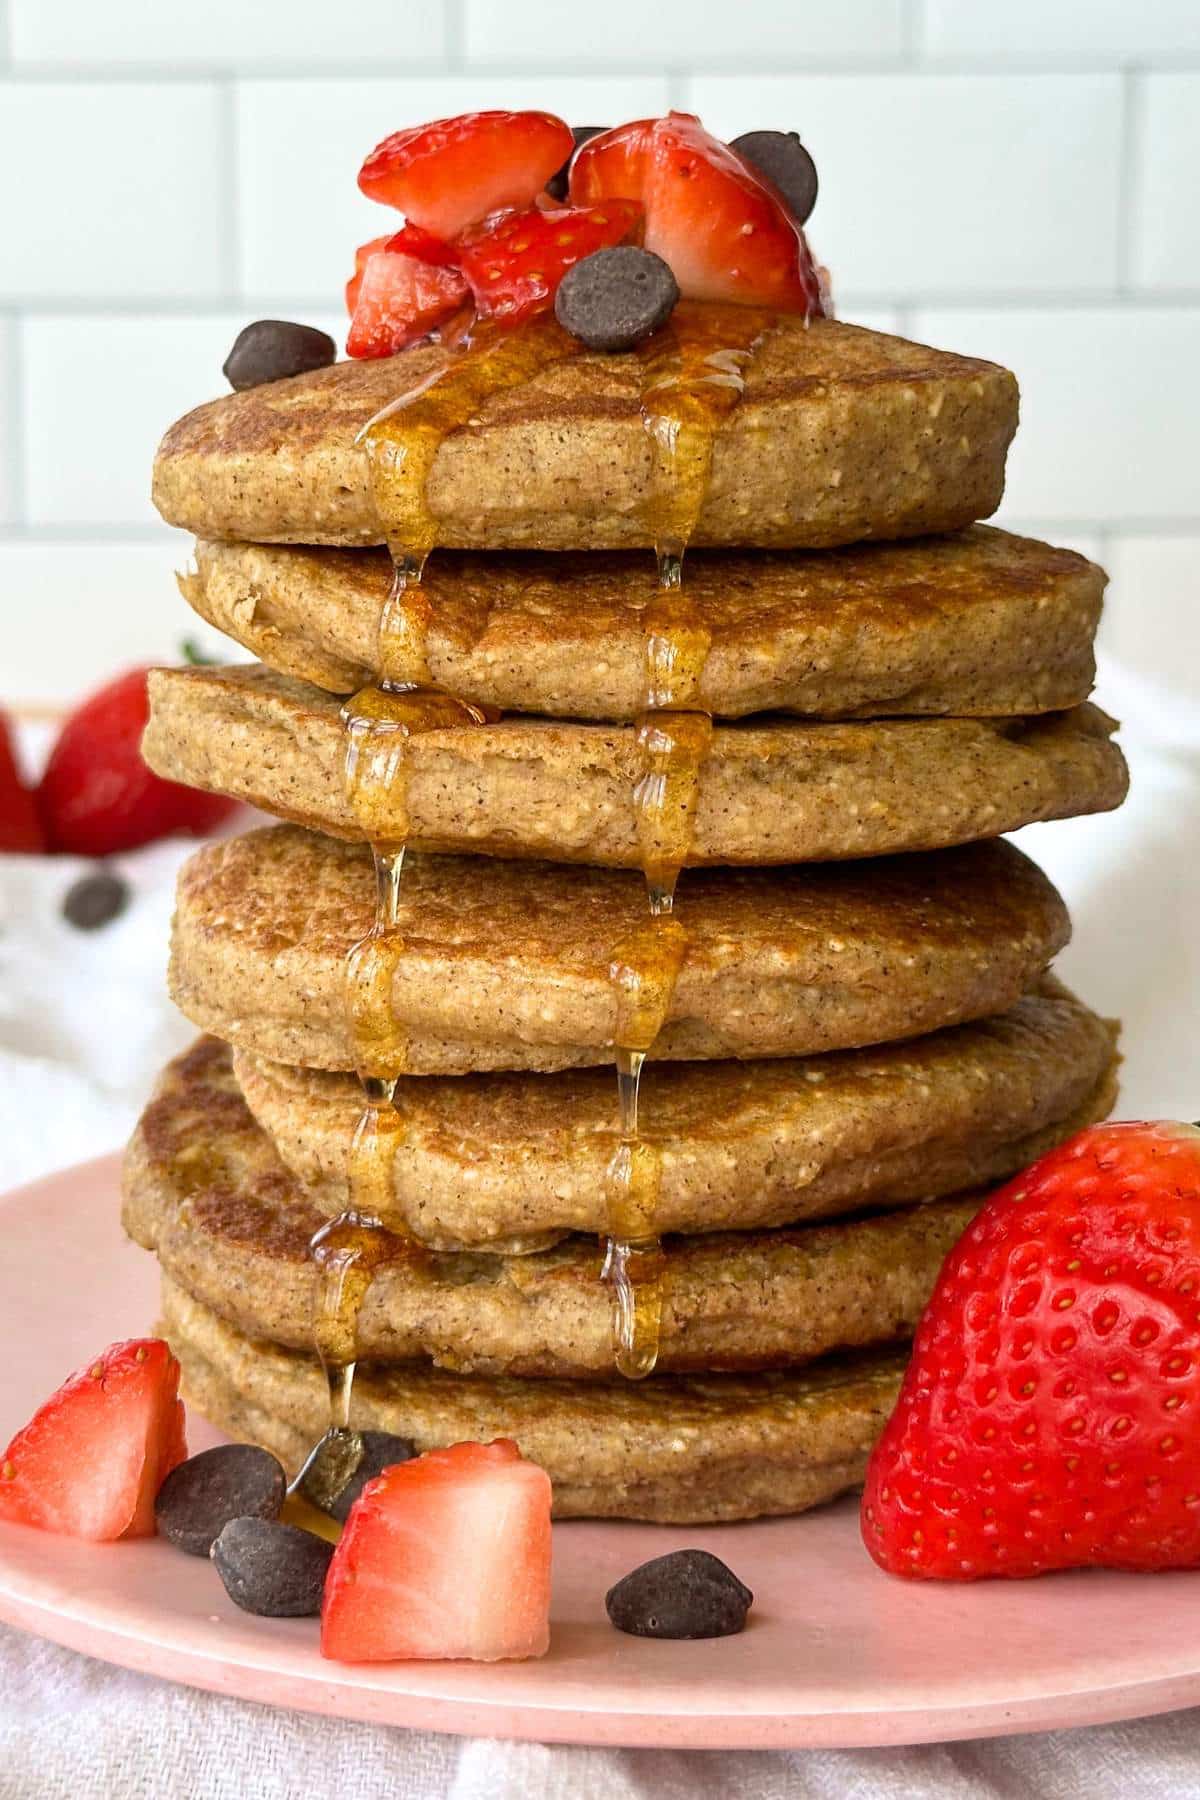 Tall stack of vegan oatmeal blender pancakes on a pin plate. Strawberries and chocolate chips are piled on top. Maple syrup is running down the stack.